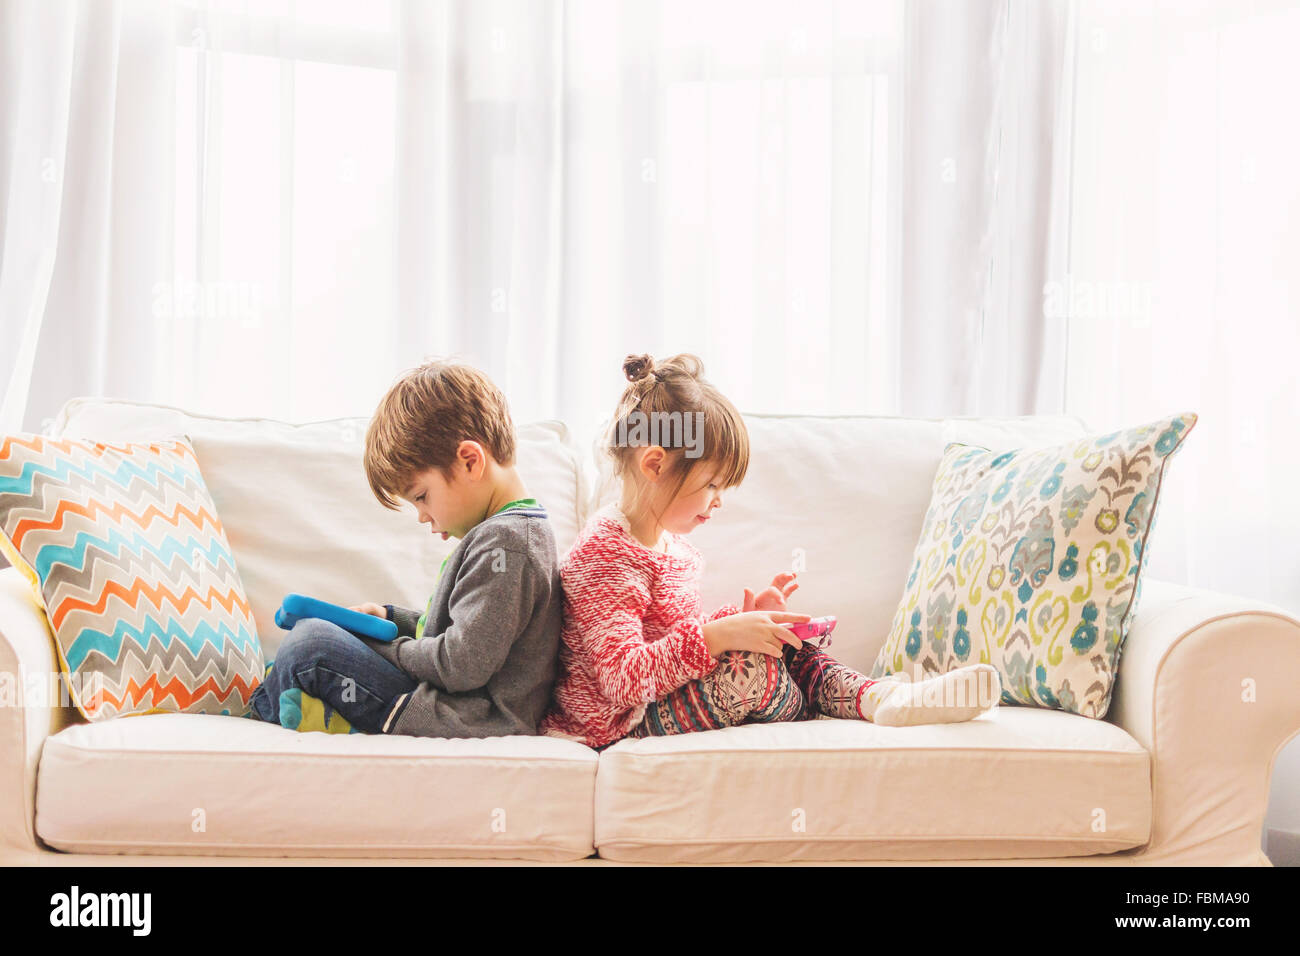 Boy and girl sitting back to back using digital tablets Stock Photo